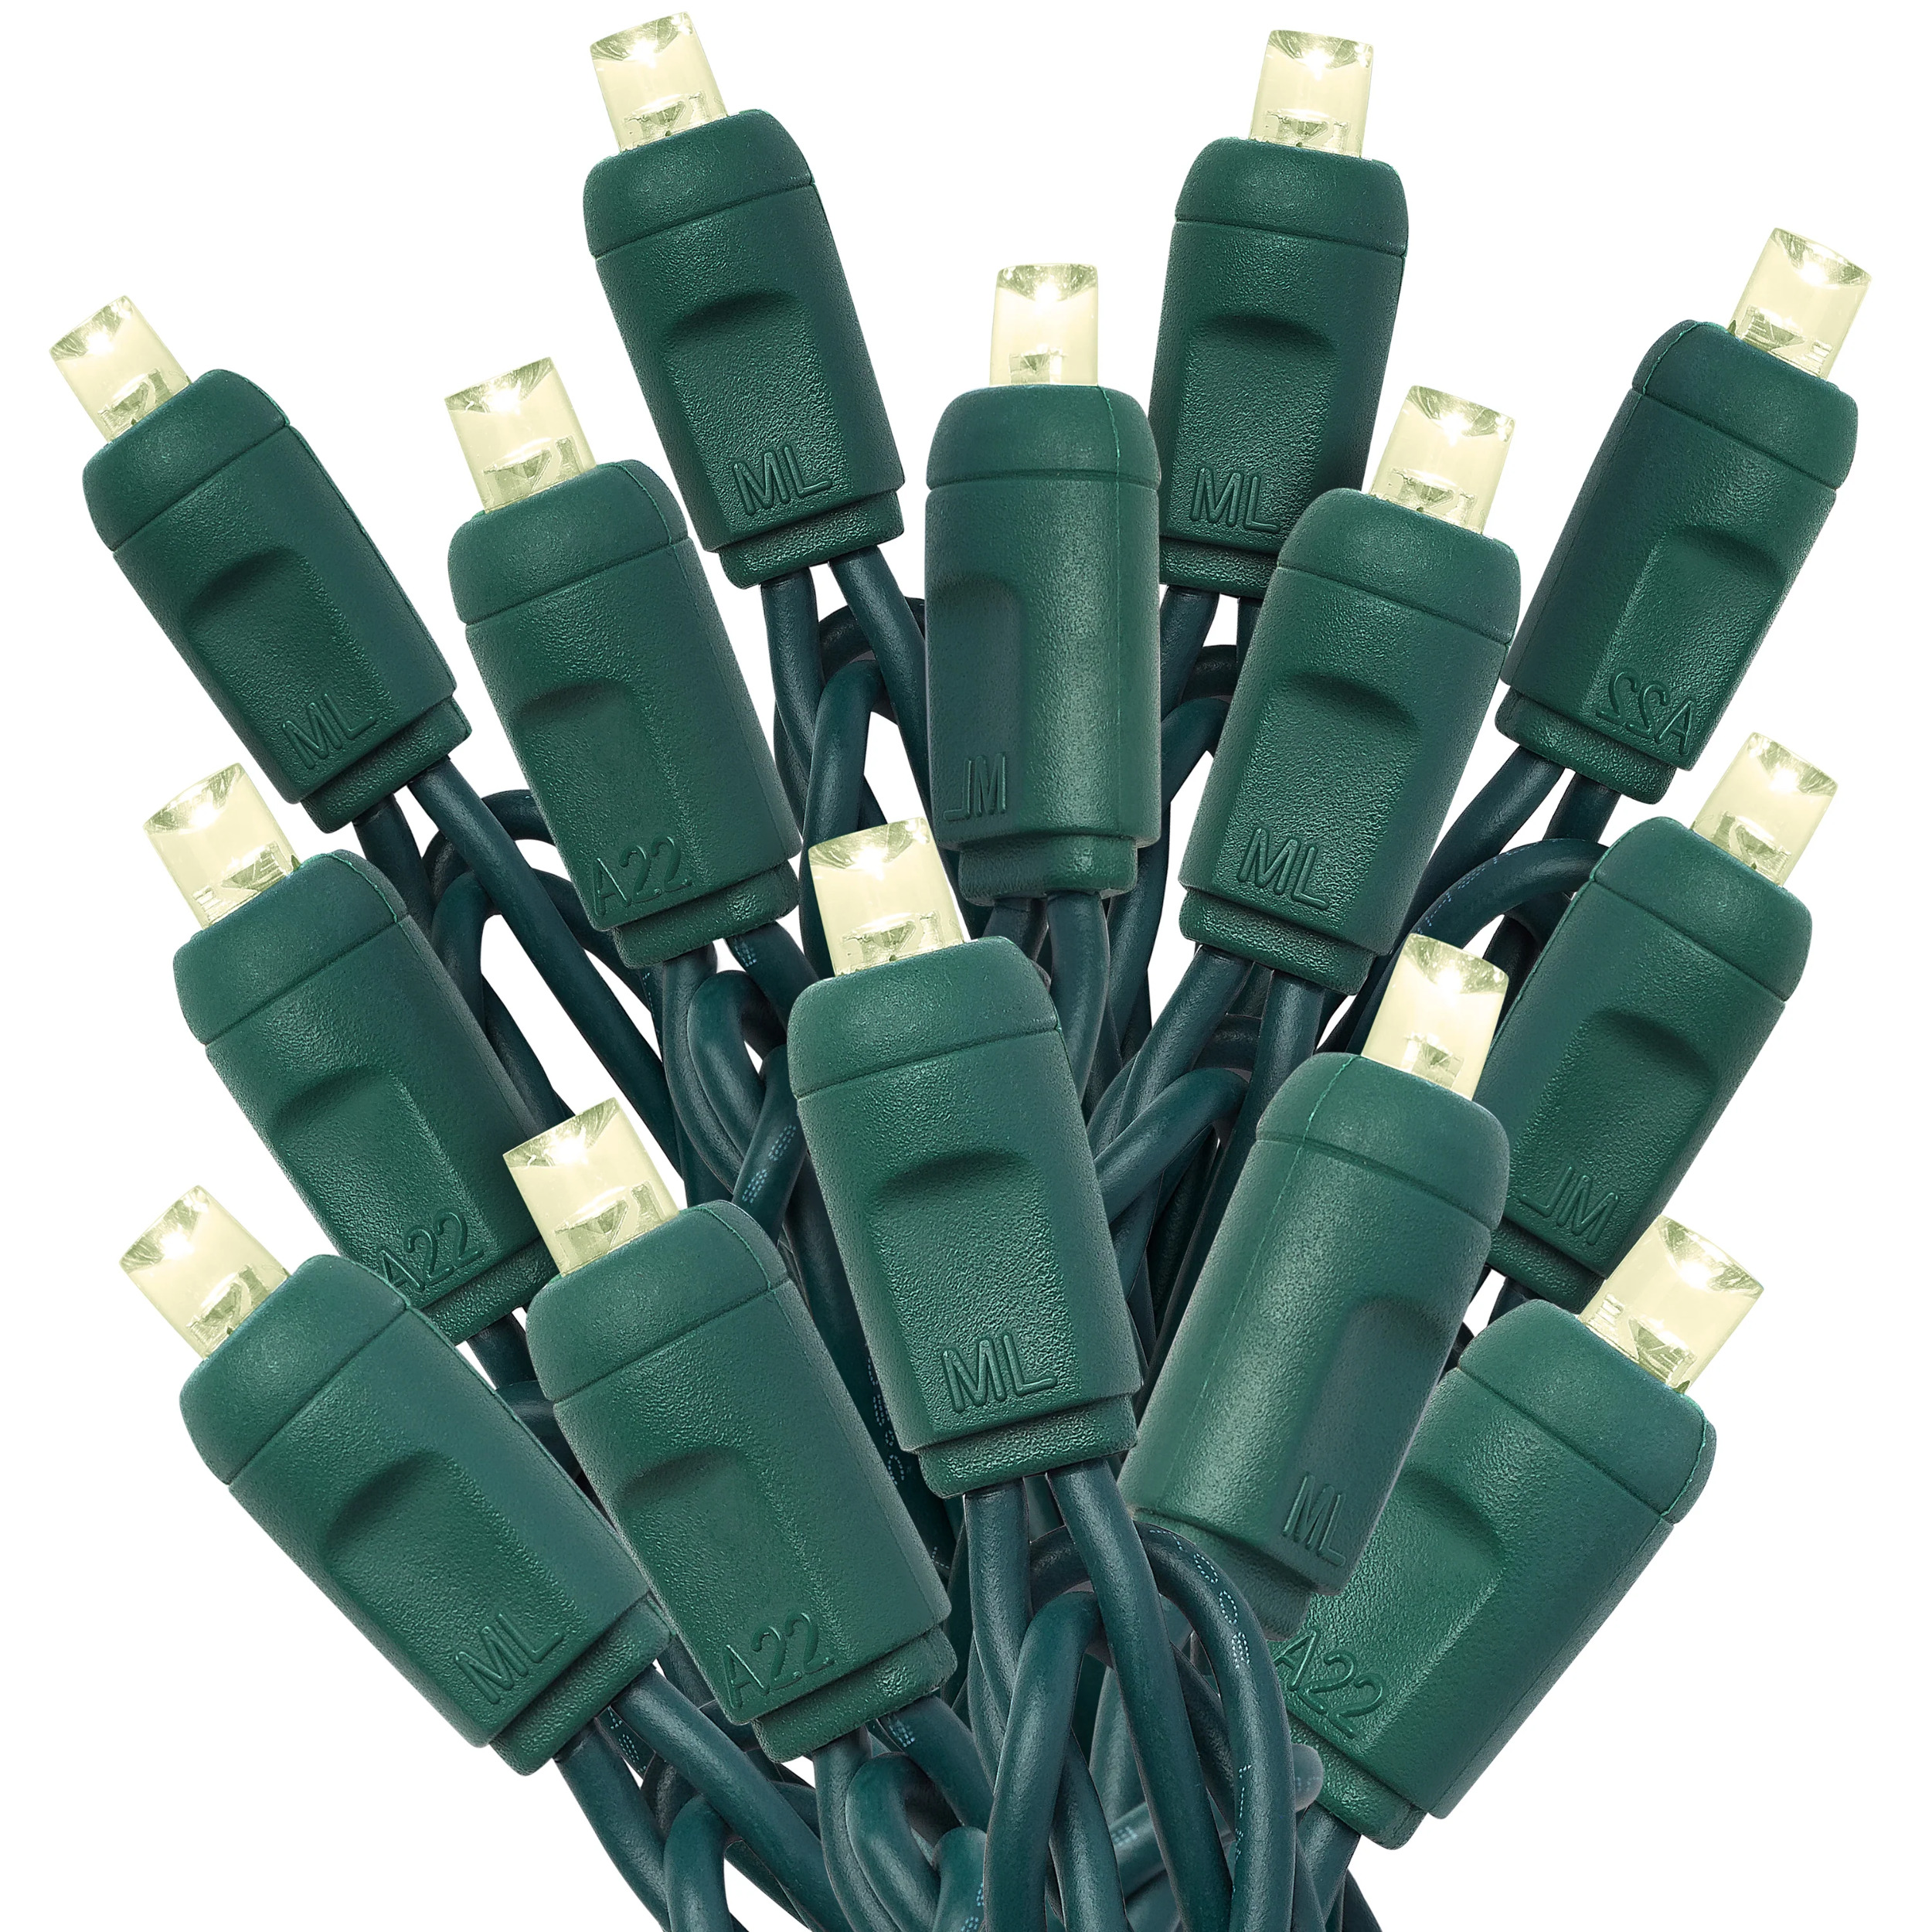 Holiday Lighting Outlet 5MM 50-Count LED Teal Indoor/Outdoor Mini Light String for Christmas, Holiday, Event, Party, Tree, and Lawn Lighting, Green Cord, UL Listed. - image 2 of 11